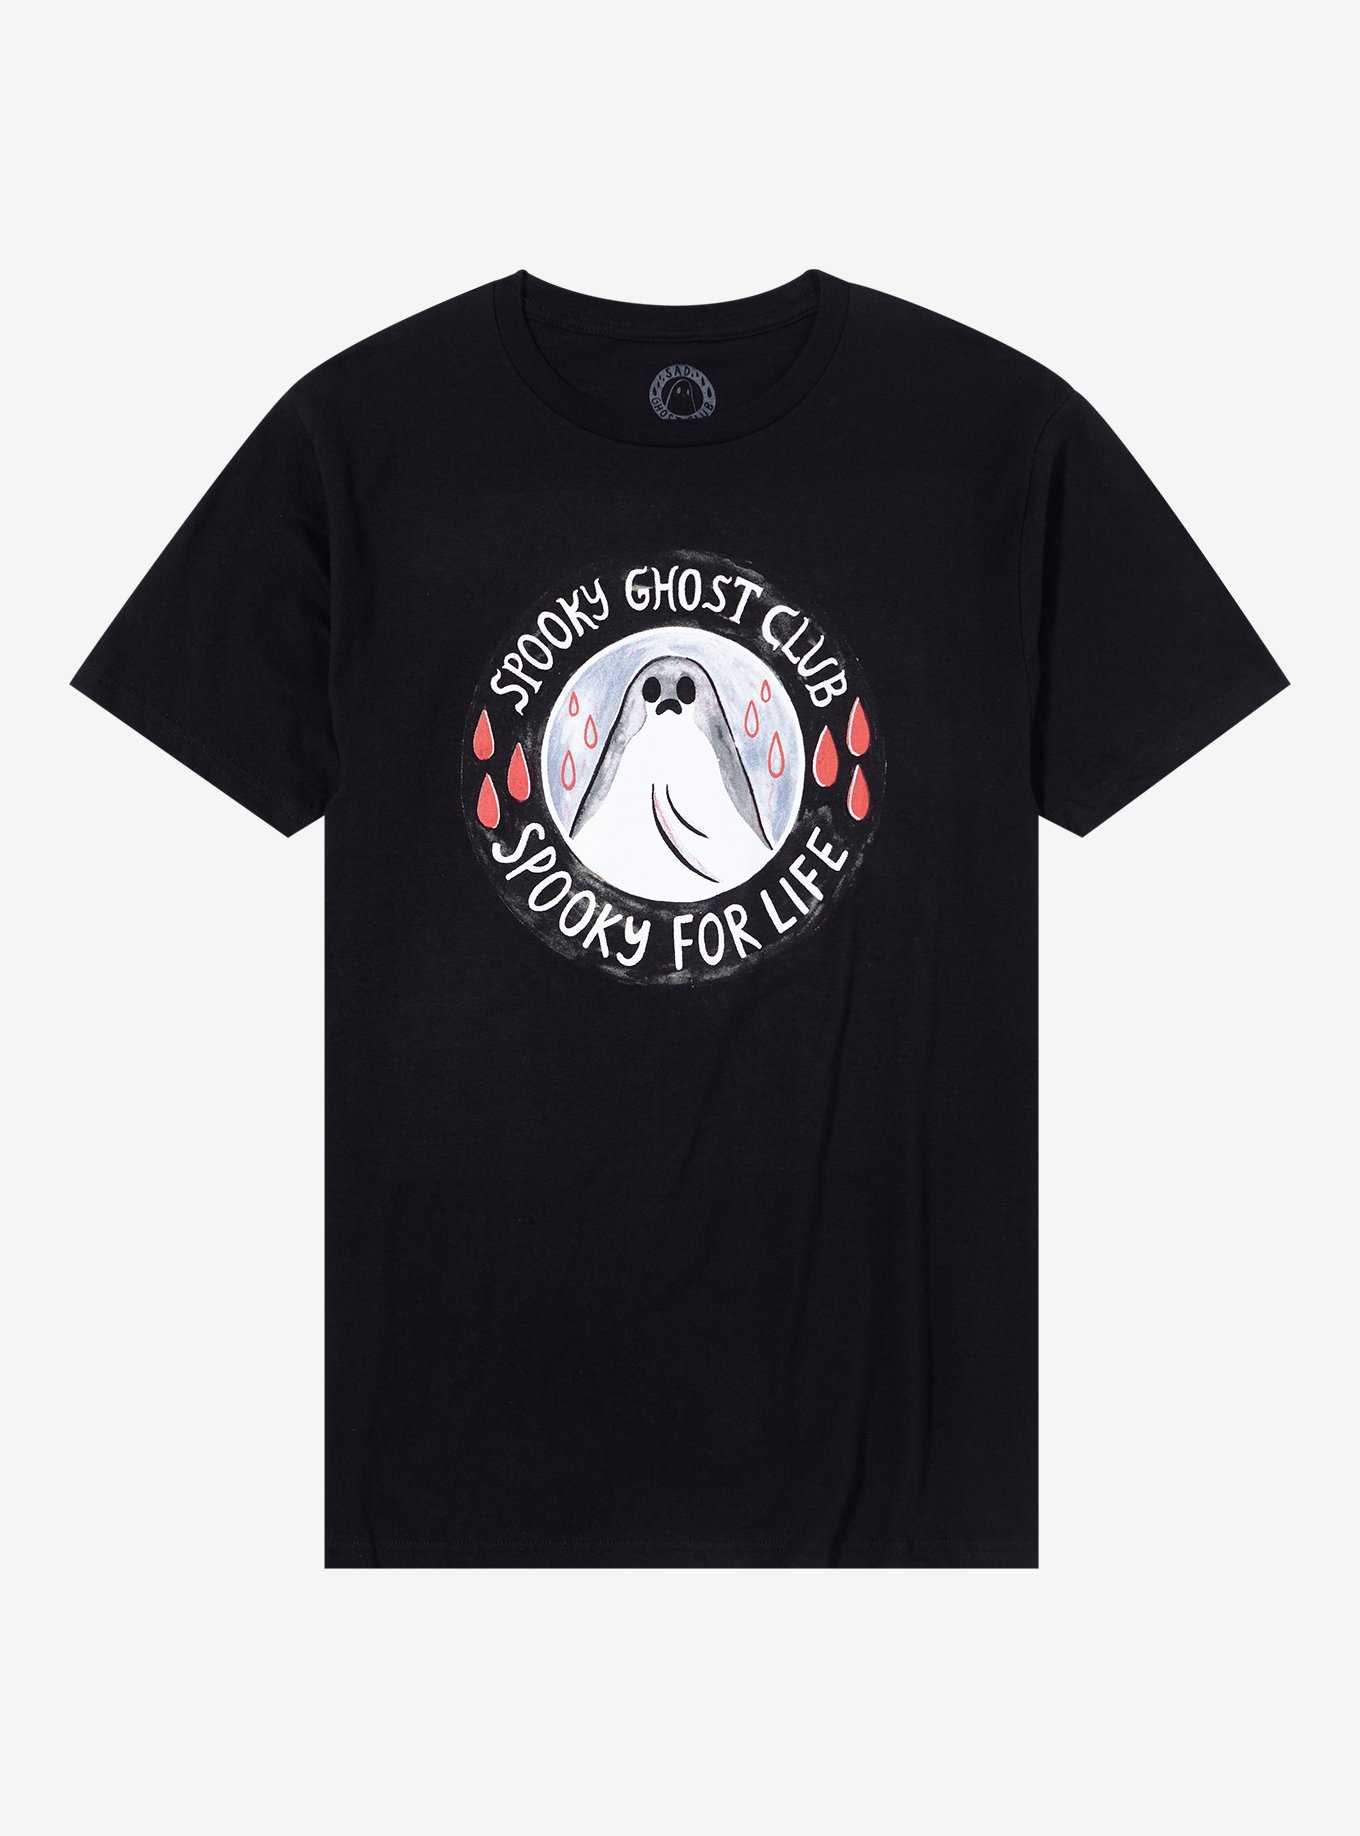 Spooky For Life T-Shirt By The Sad Ghost Club, , hi-res